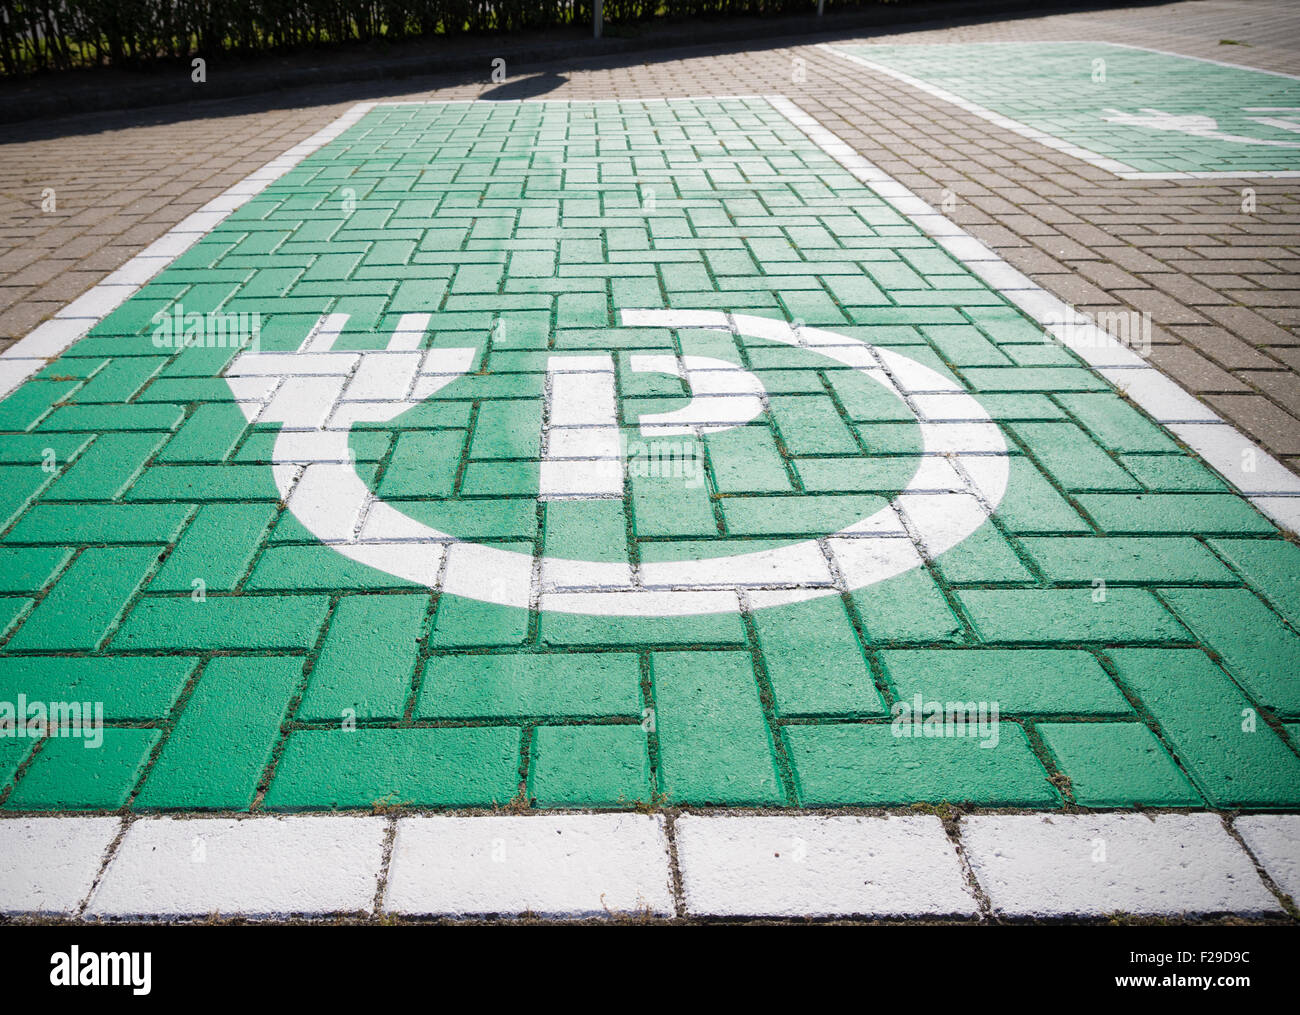 parking place with charging symbol for electric cars Stock Photo